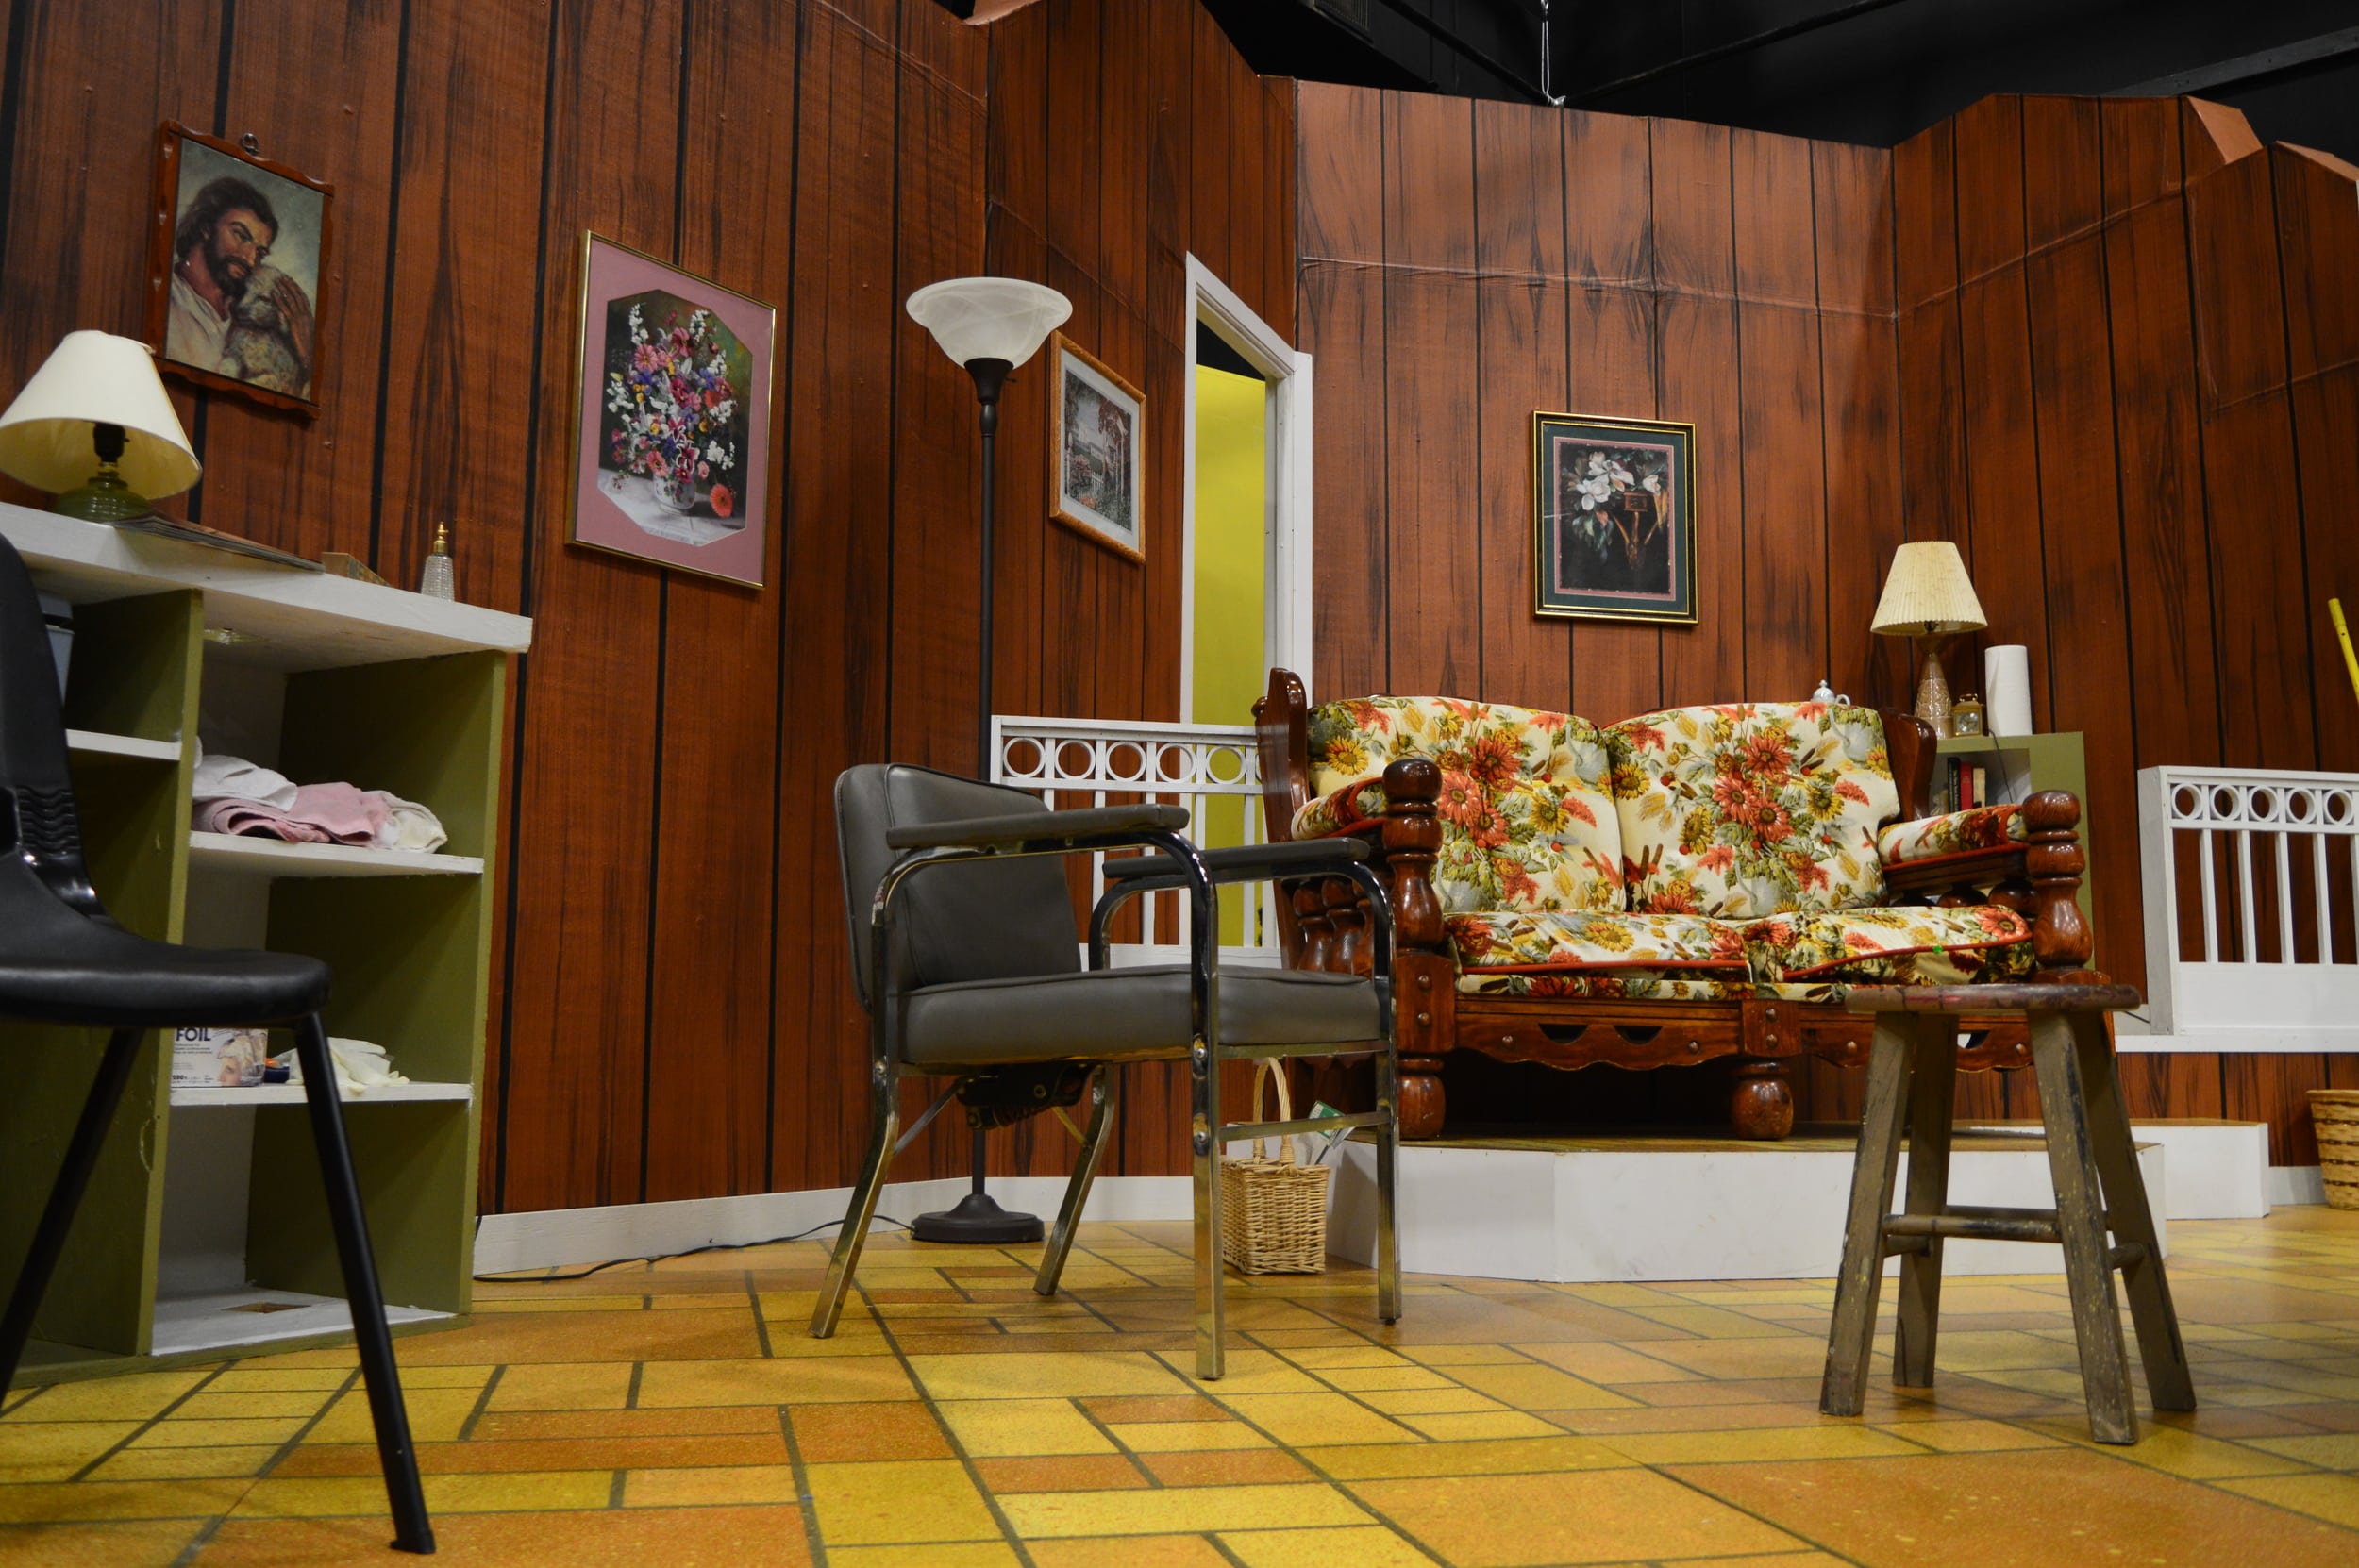 Beauty parlor set from Steel Magnolias